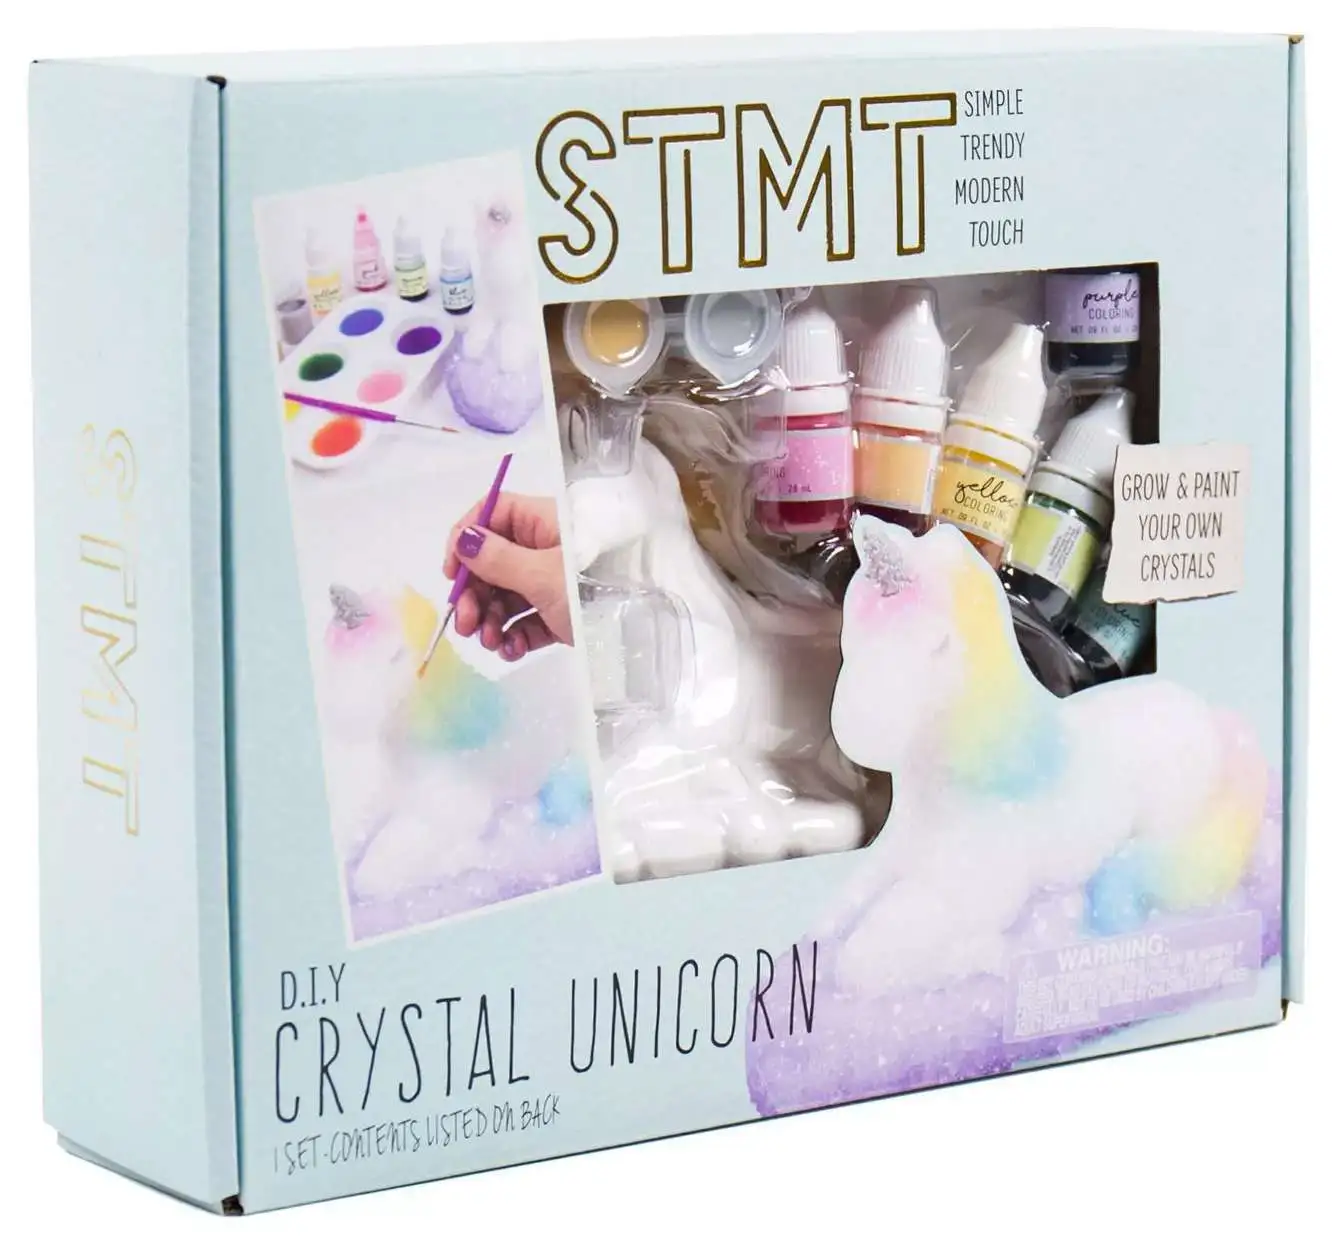  Simple Trendy Modern Touch STMT D.I.Y Crystal Unicorn